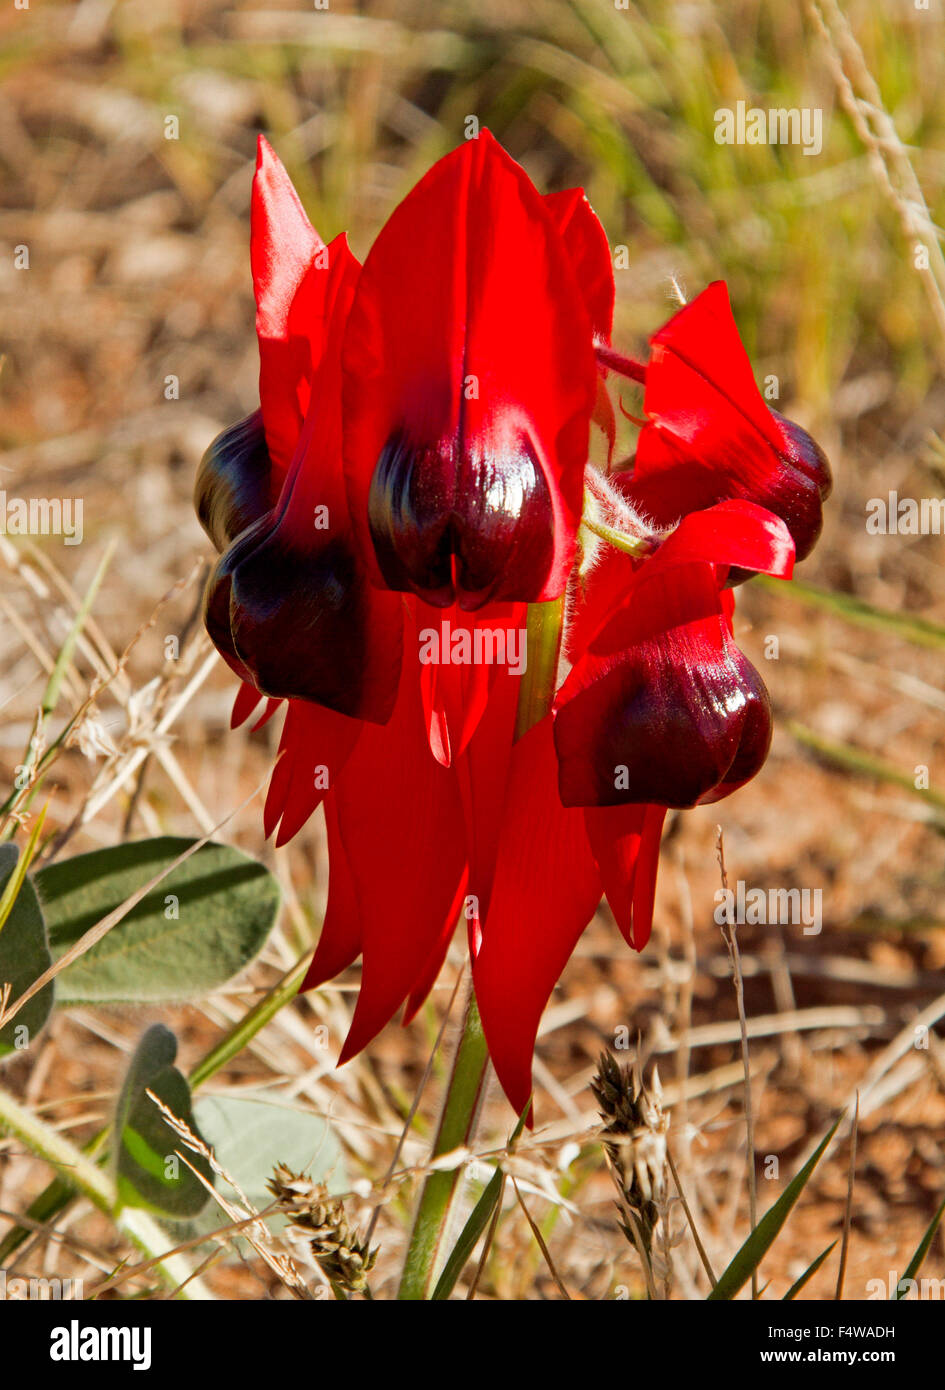 Vivid red flowers of Sturt's desert pea Swainsona formosa, state floral emblem, in Flinders Ranges in outback South Australia Stock Photo